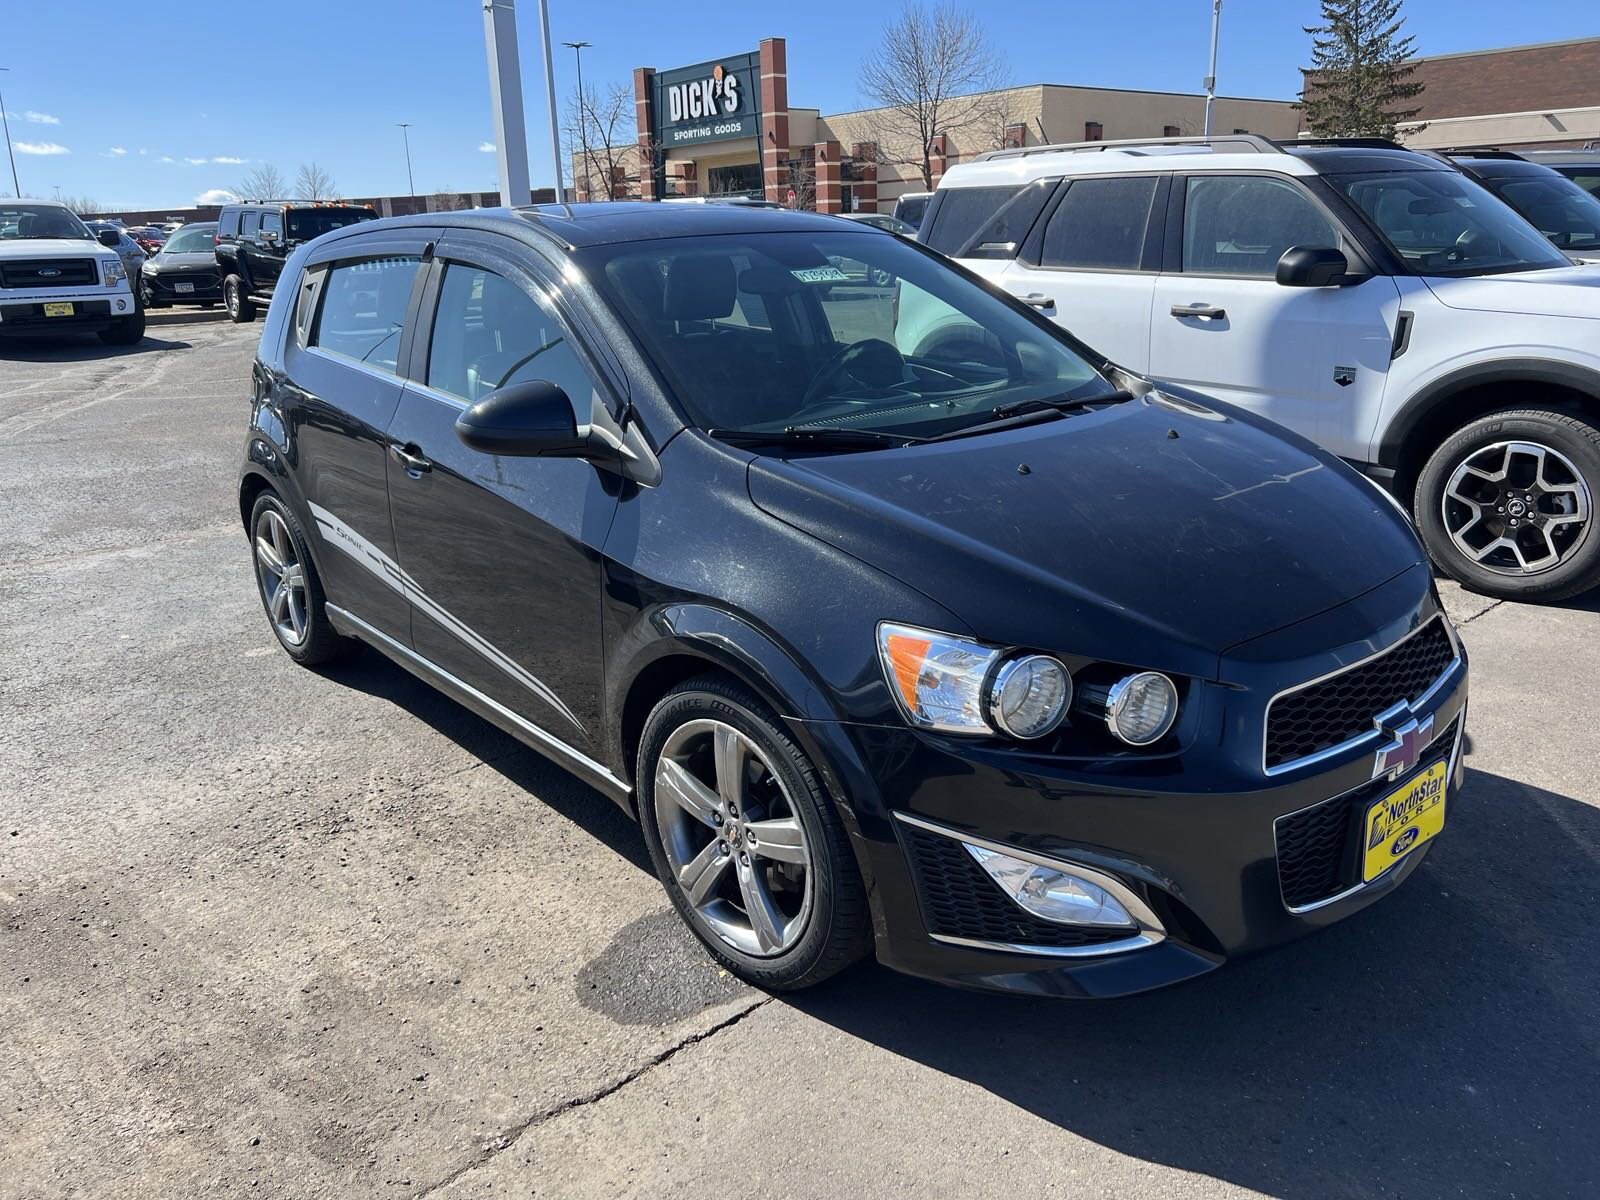 Used 2013 Chevrolet Sonic RS with VIN 1G1JH6SB9D4234319 for sale in Duluth, Minnesota